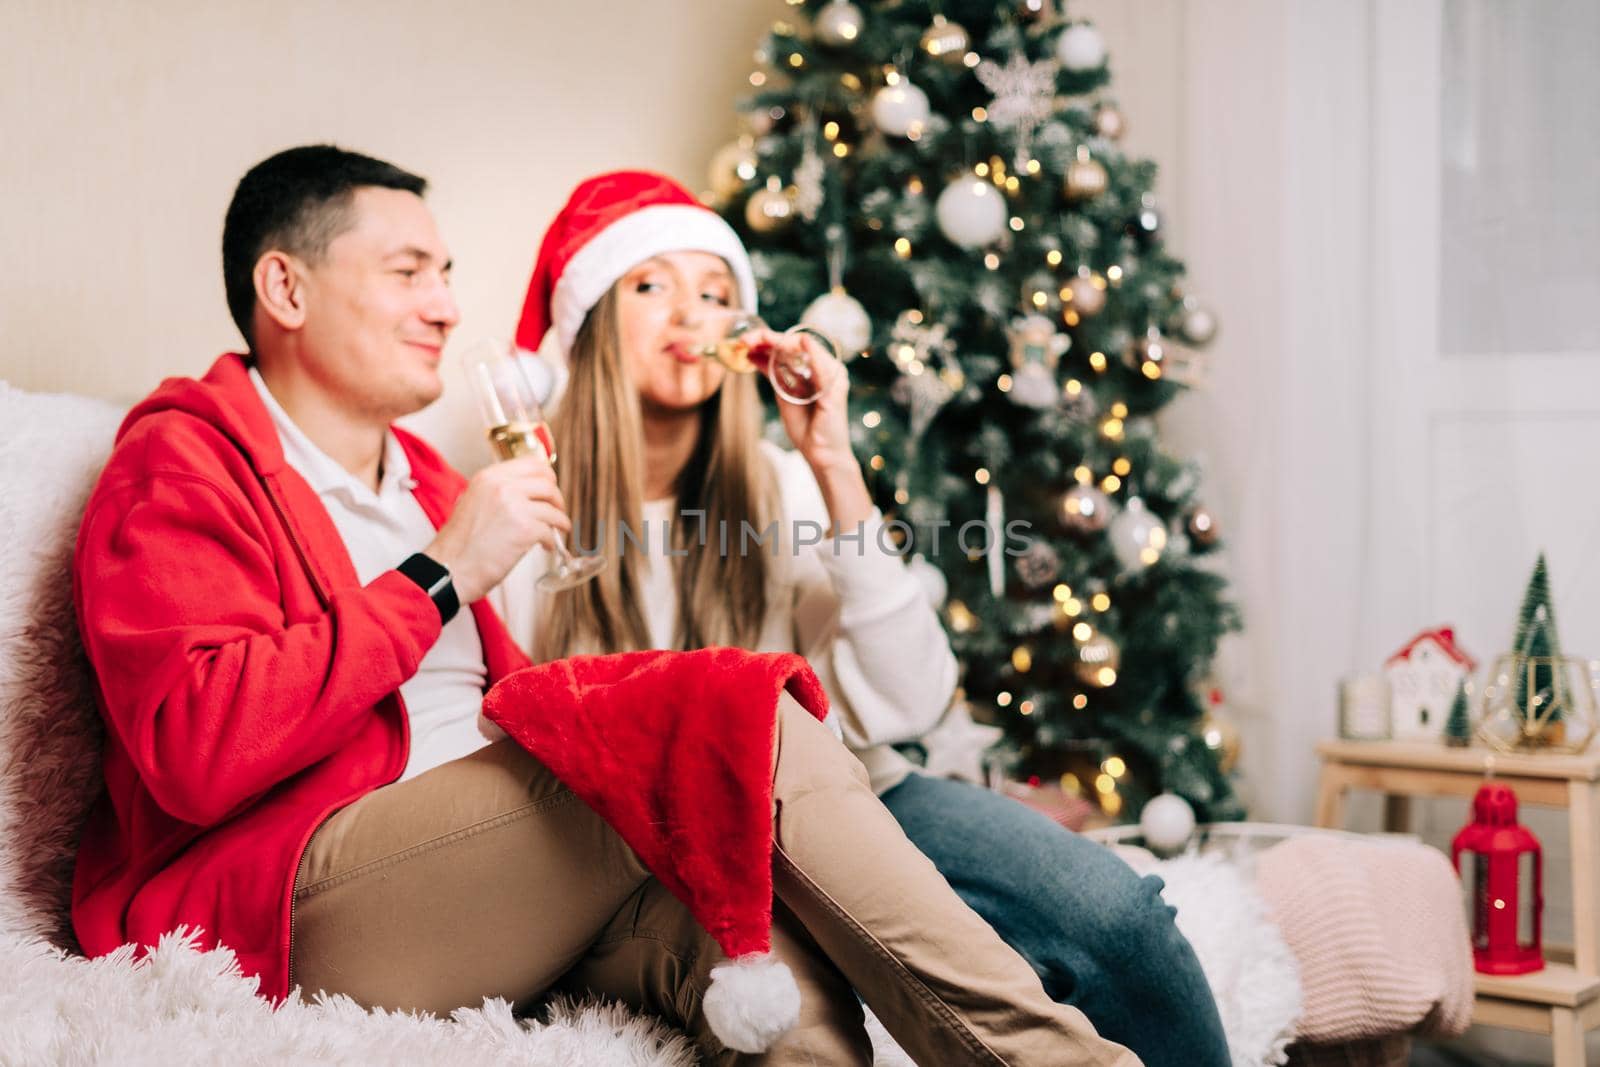 Family couple with funny face, man and woman with champagne celebrate New year after Christmas holidays. Home decor with Christmas tree.